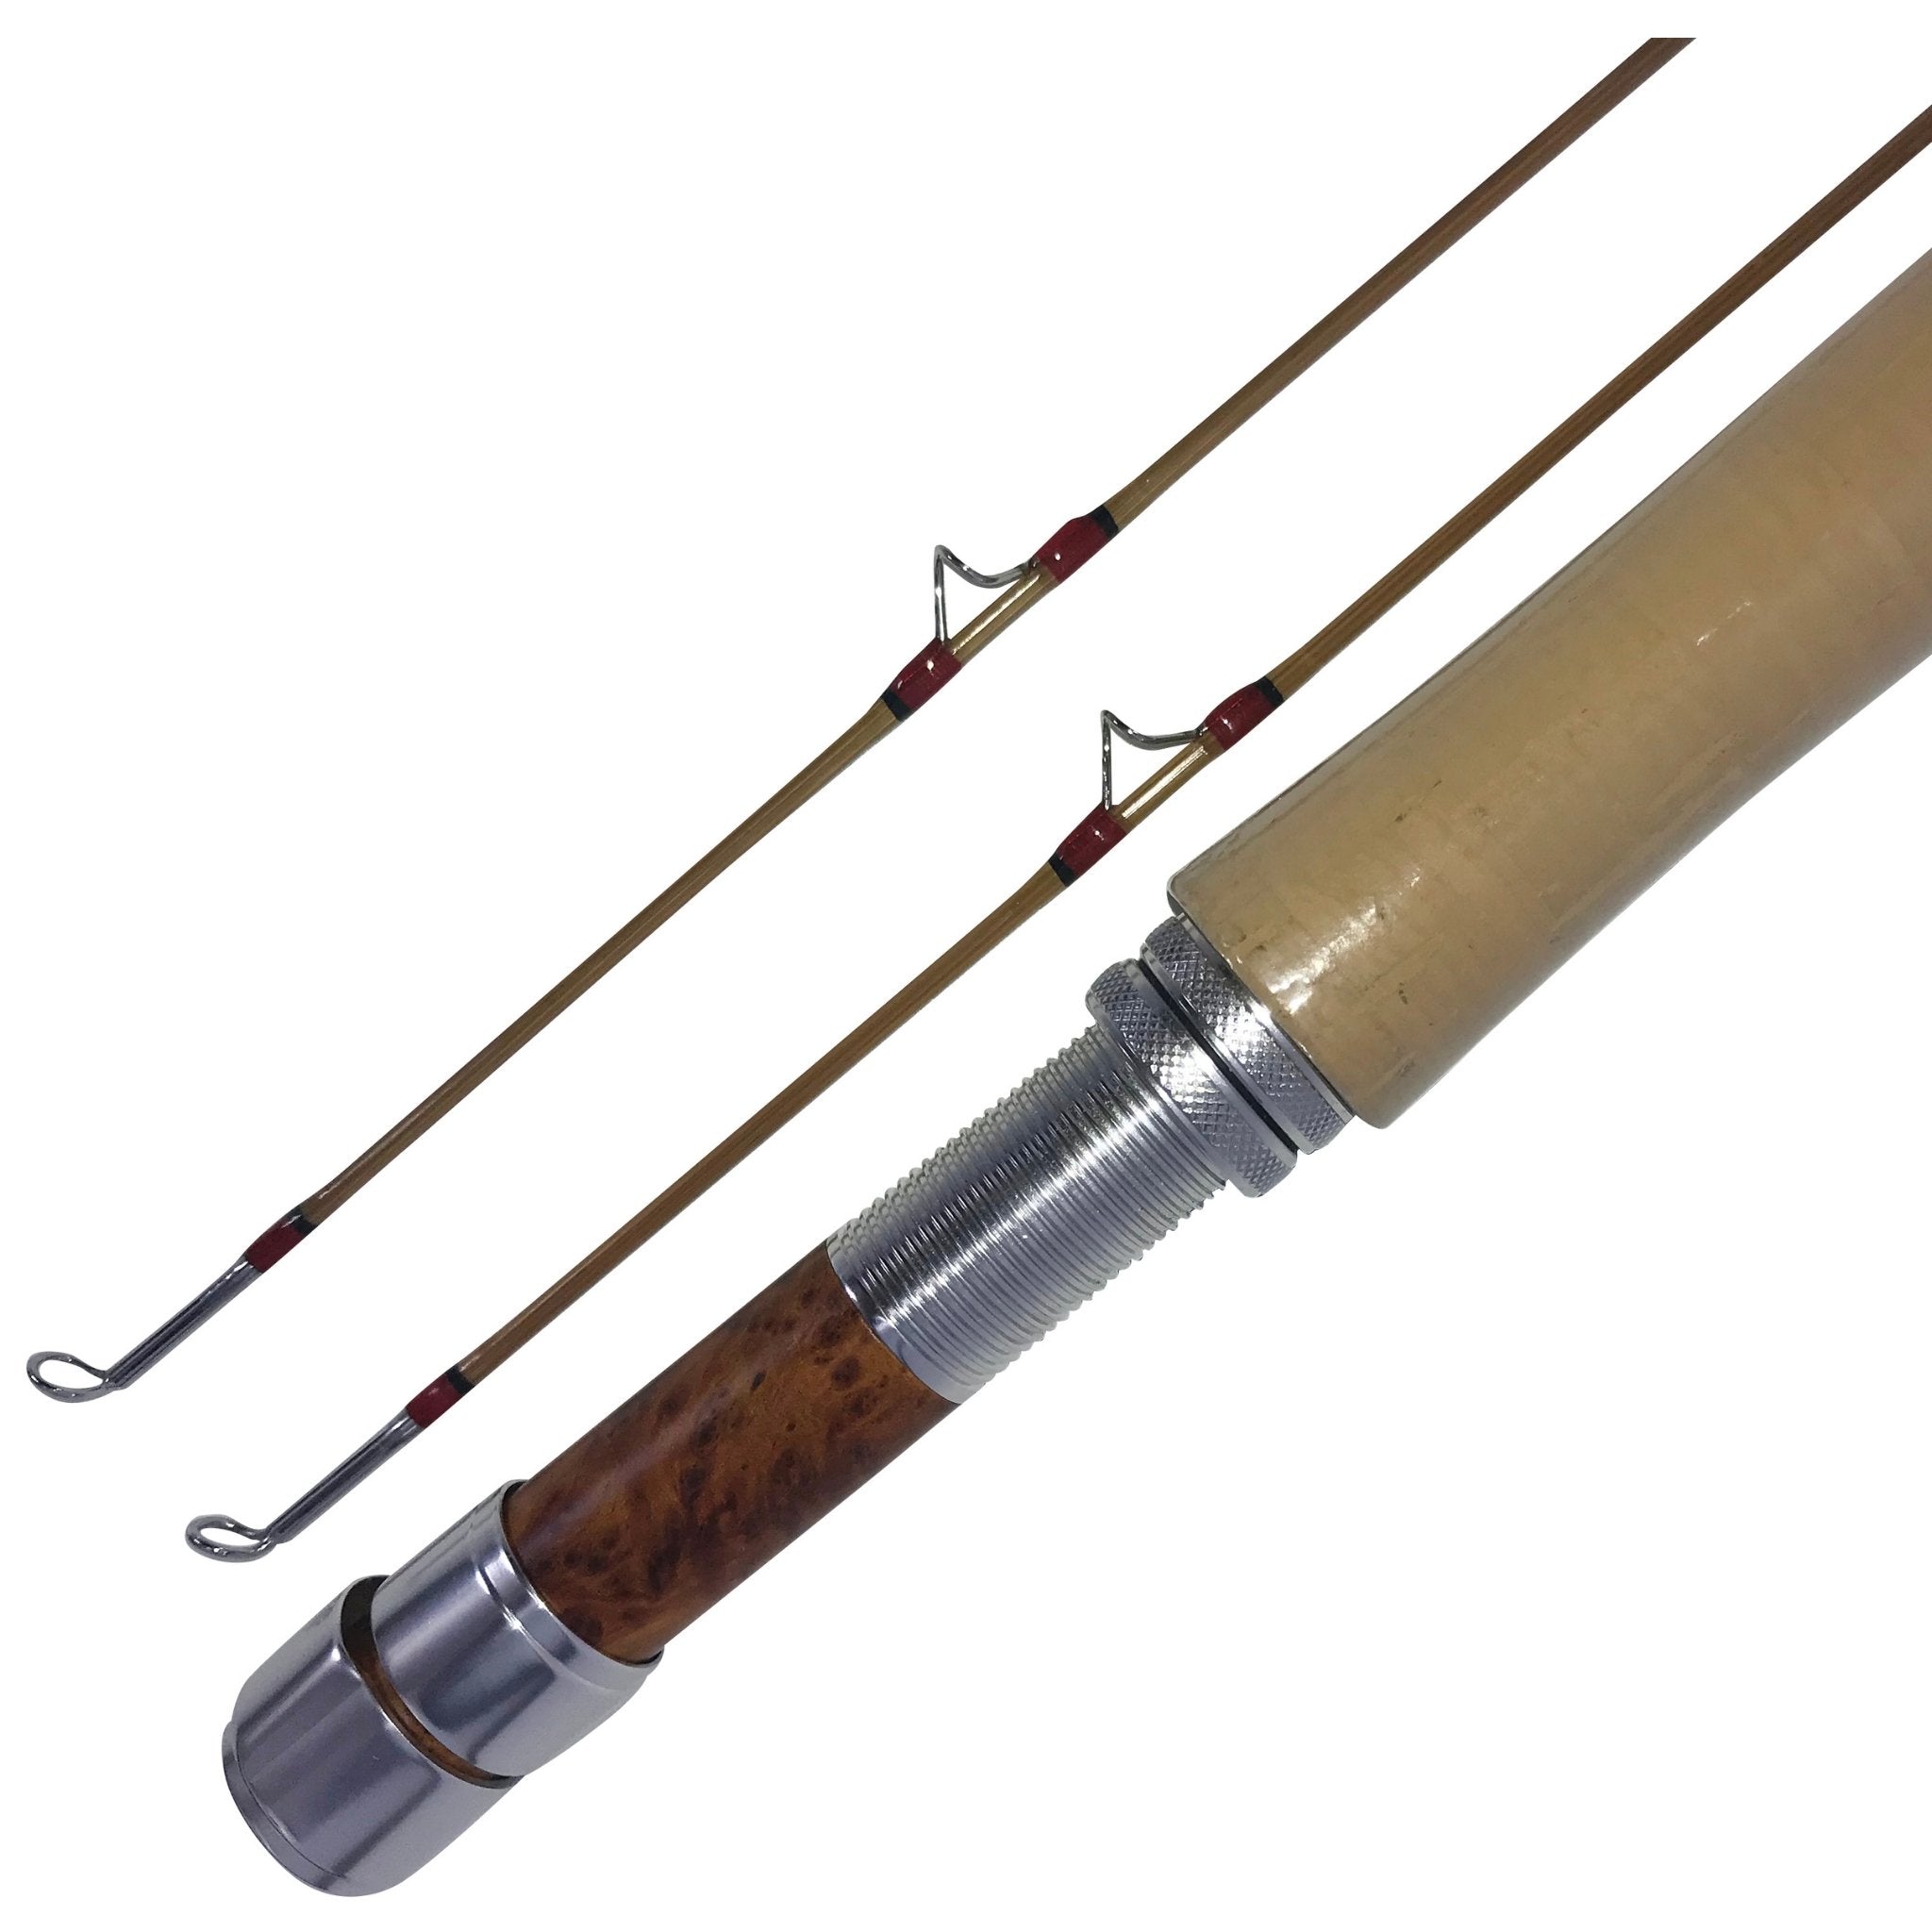 Deluxe Grande Ronde 6' 6 3-wt Medium Action Bamboo Fly Rod - Headwaters  Bamboo